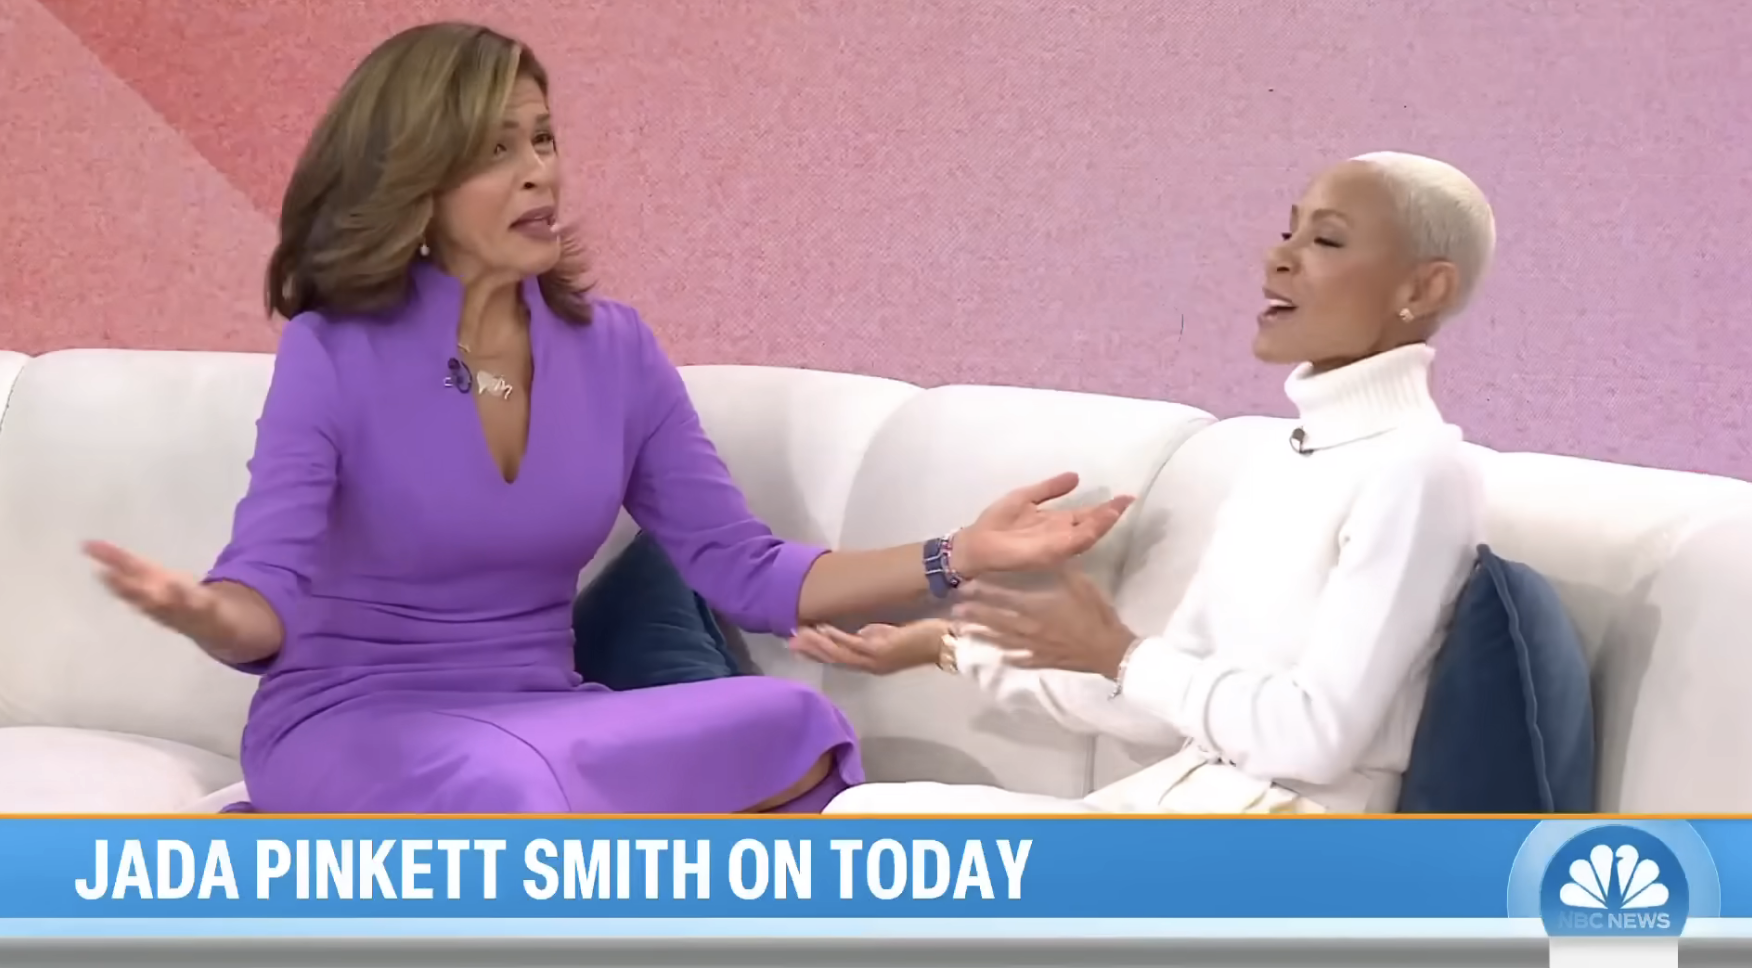 hoda with her arms stretched out in question during the interview with jada